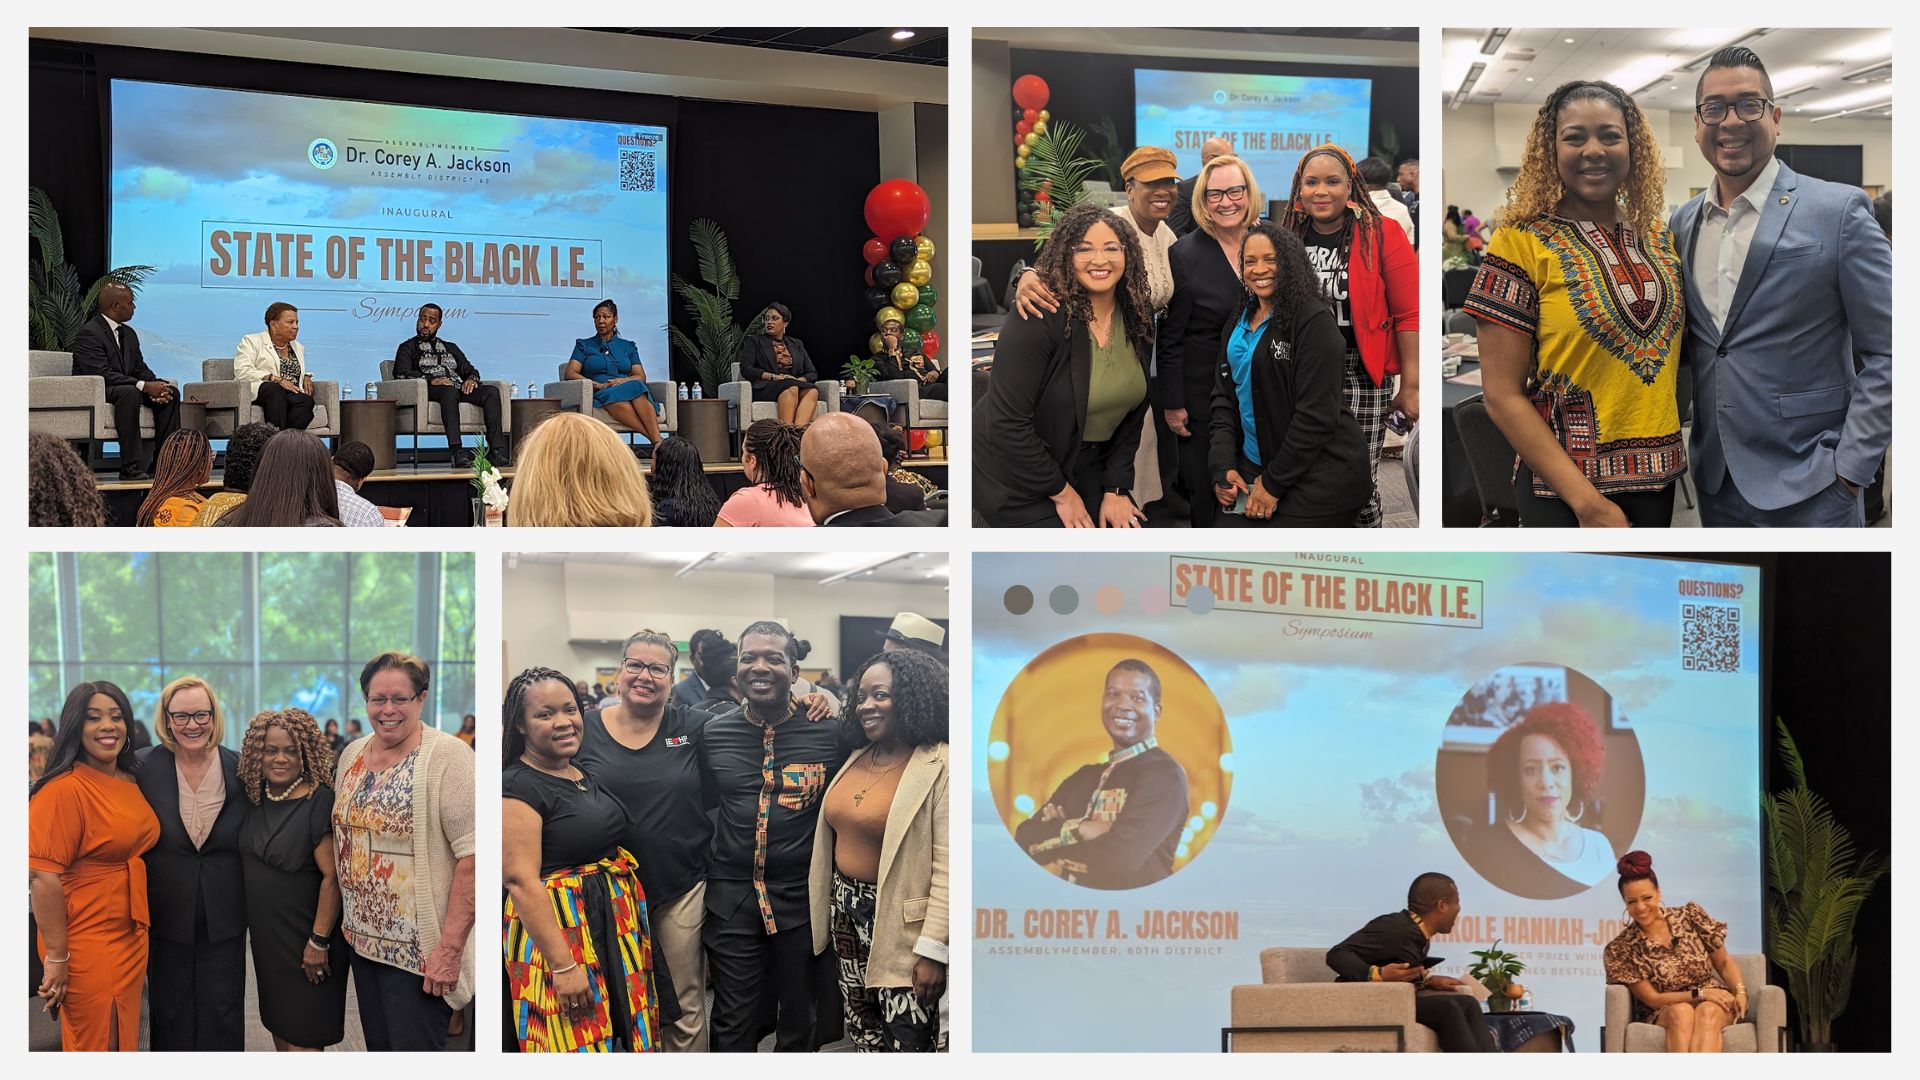 Collage of photos from the State of the Black IE Symposium event